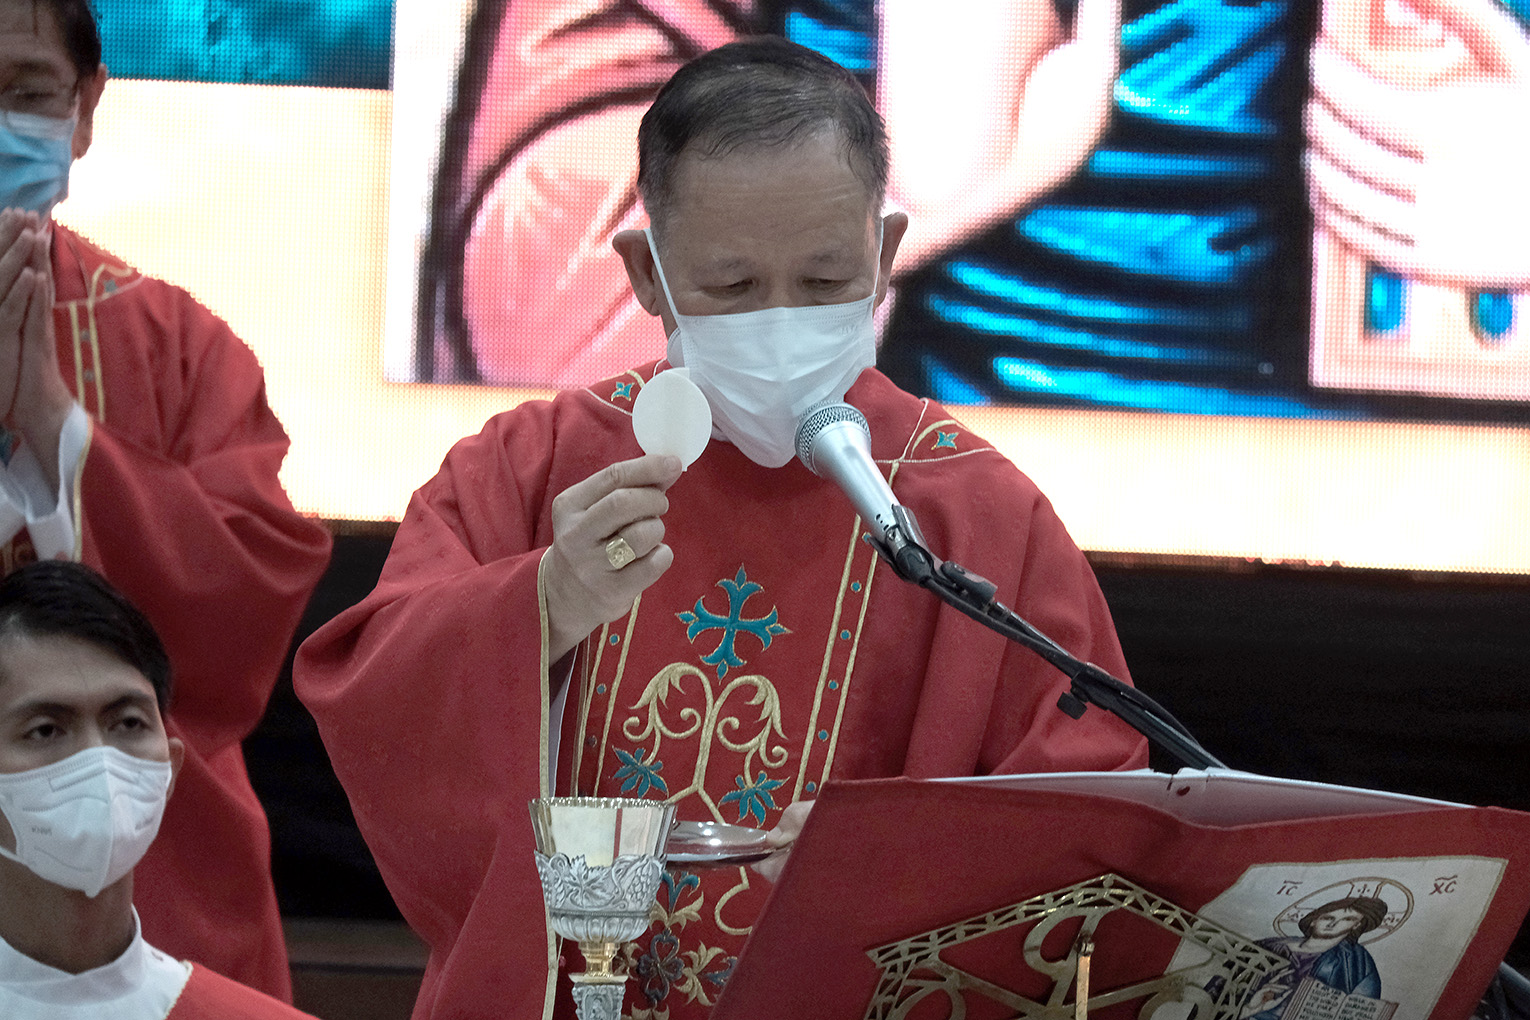 Pope Francis appoints Cardinal Advincula to Vatican office responsible for selecting bishops